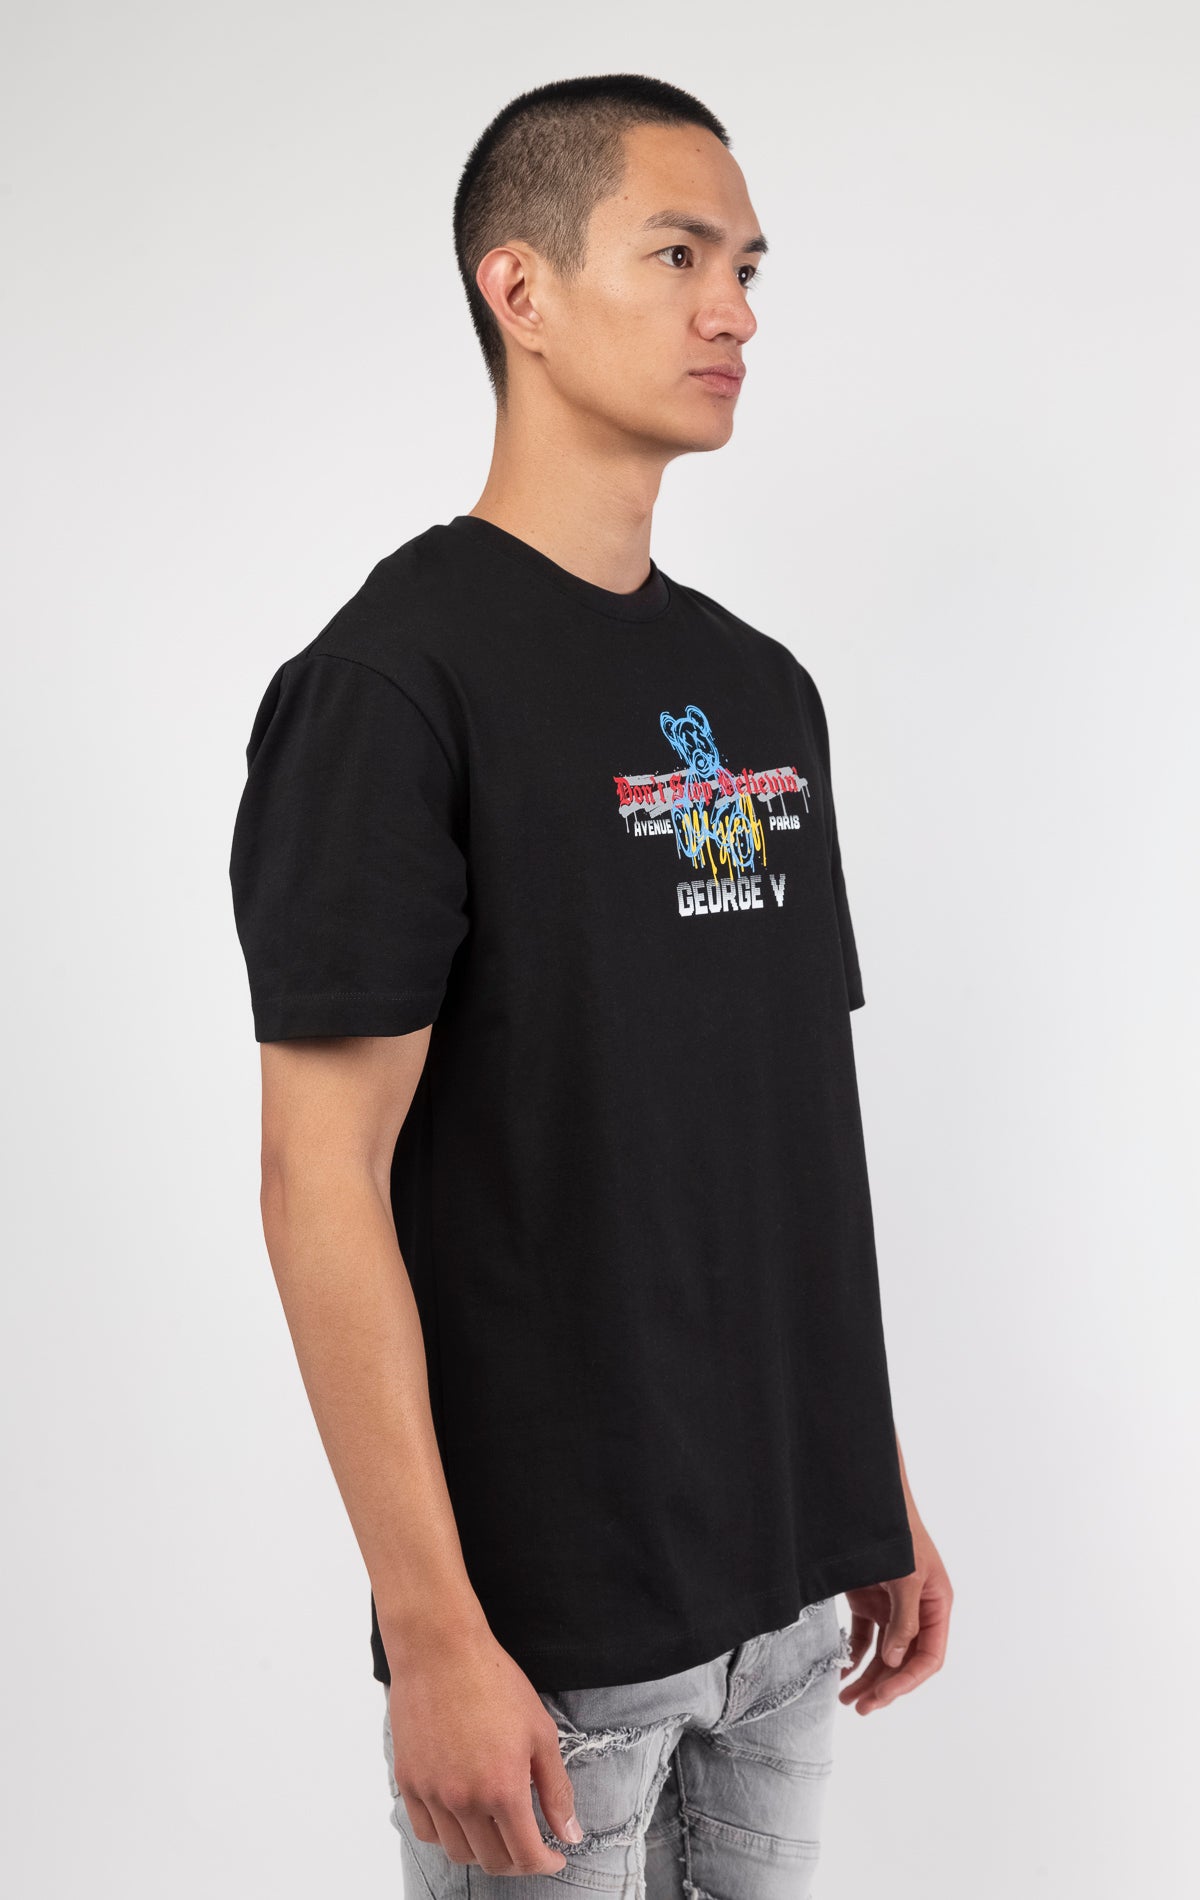 George V's "Don't Stop Believin" t-shirt features a BELIEVE design pattern, making it perfect for a refined streetwear look with jeans and sneakers. The stretchy fabric ensures a comfortable fit.